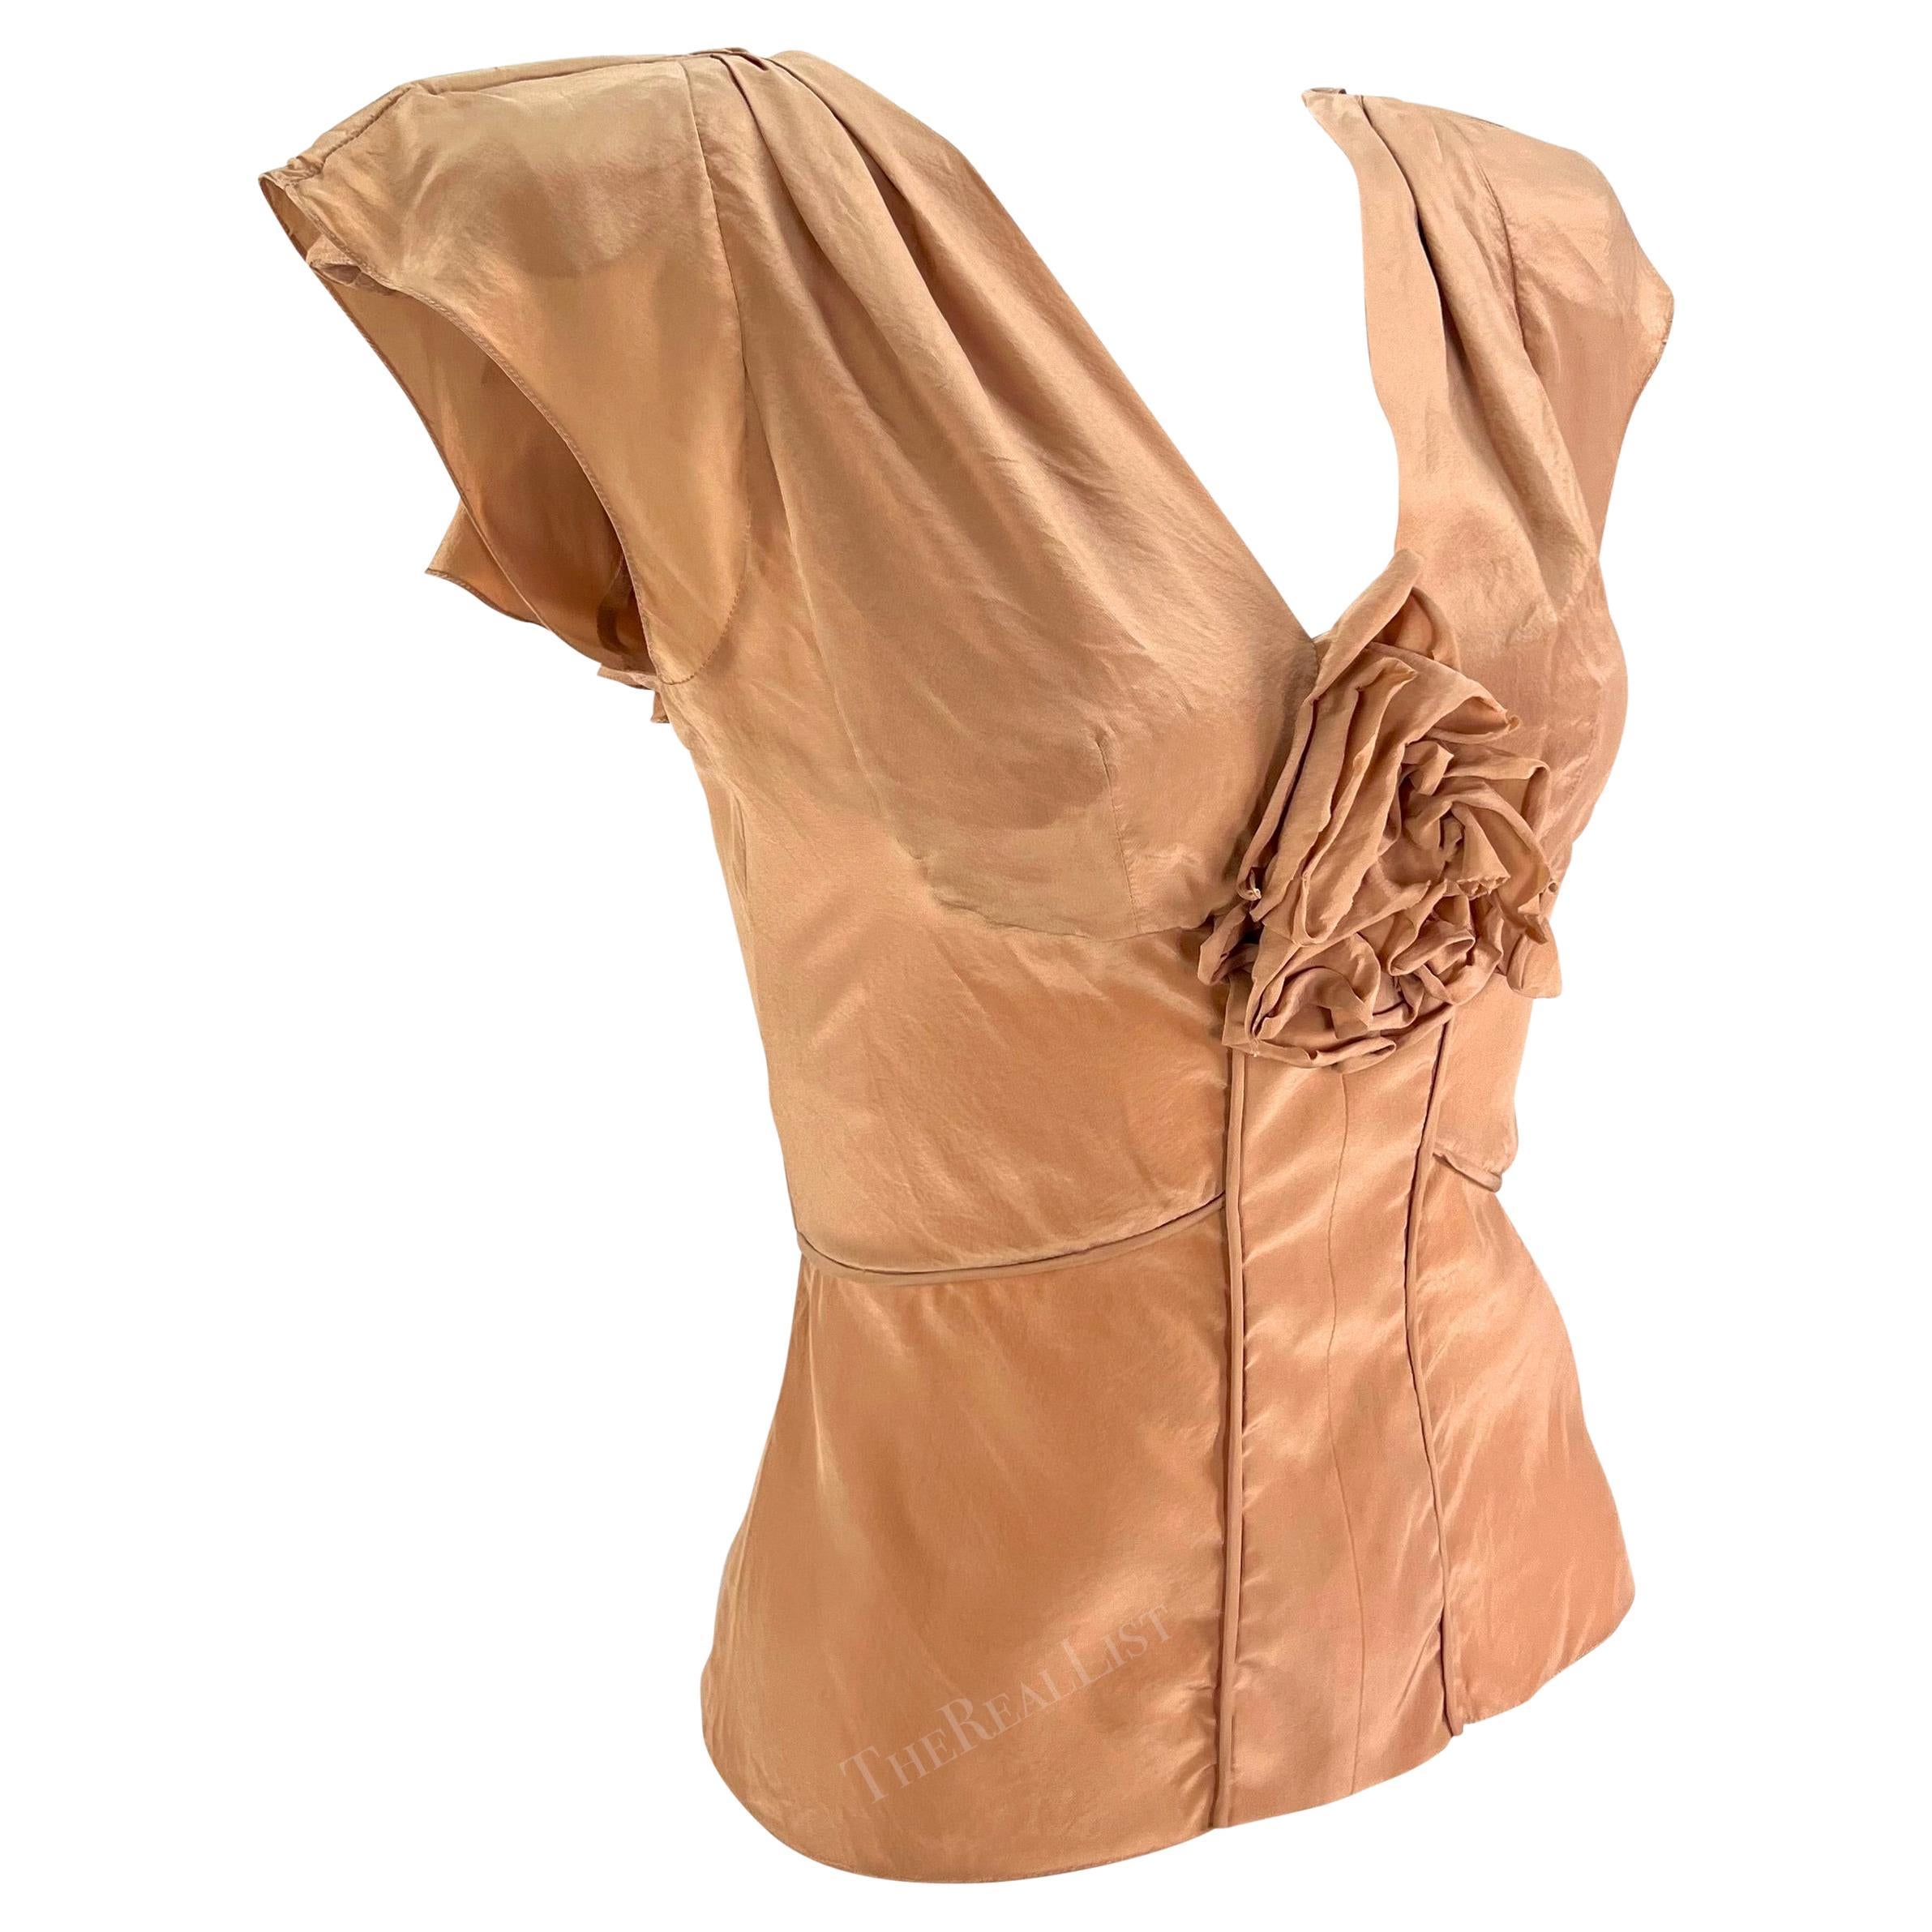 S/S 2003 Yves Saint Laurent by Tom Ford Beige Silk Floral Ruffle Top For Sale 4